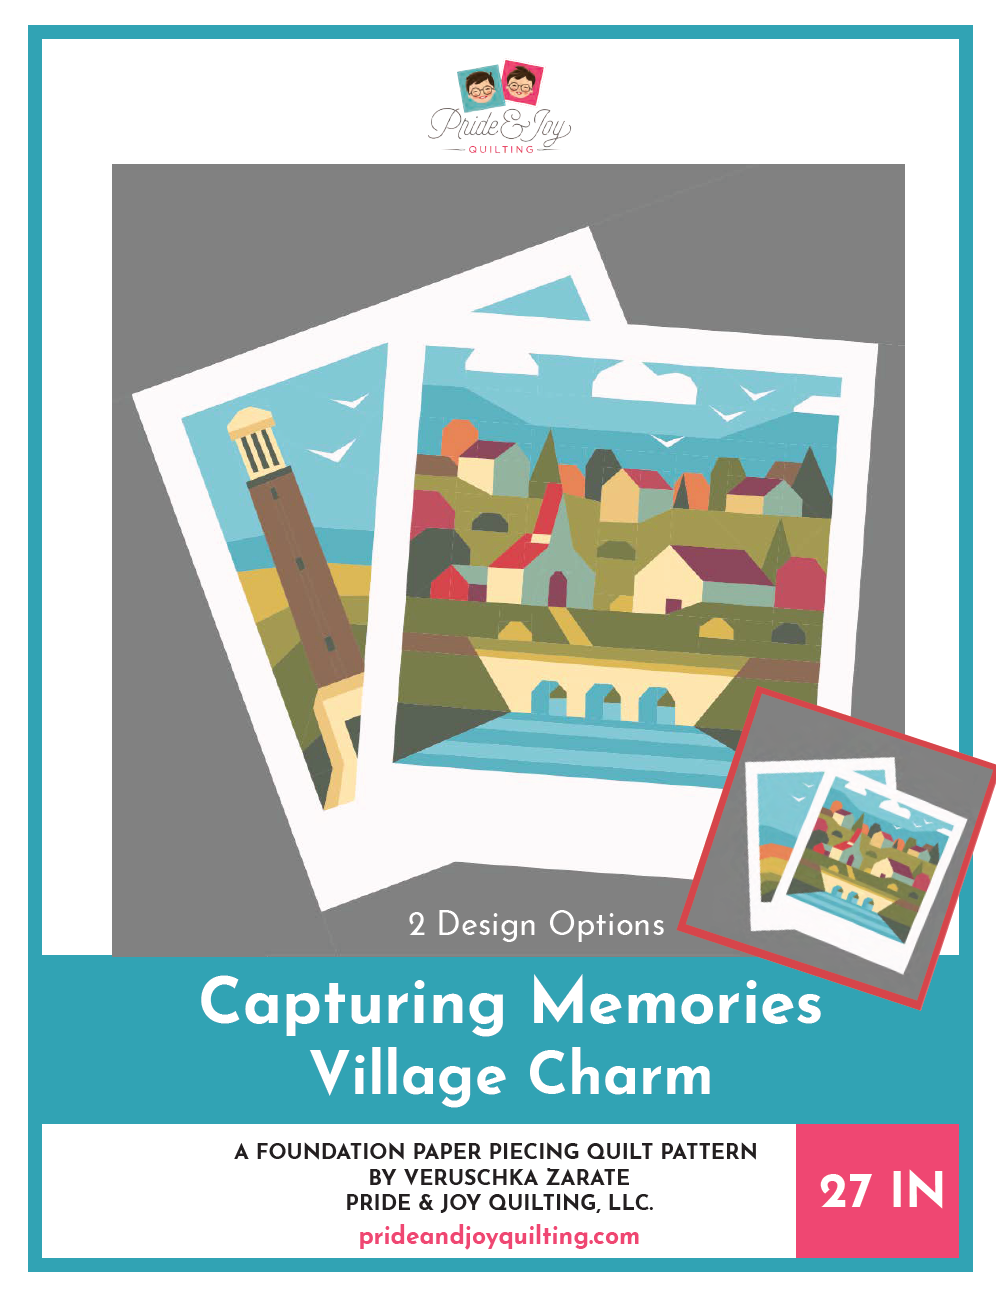 KIT for Part 6 of 9 Capturing Memories Charming Village Foundation Paper Piecing Quilt Pattern